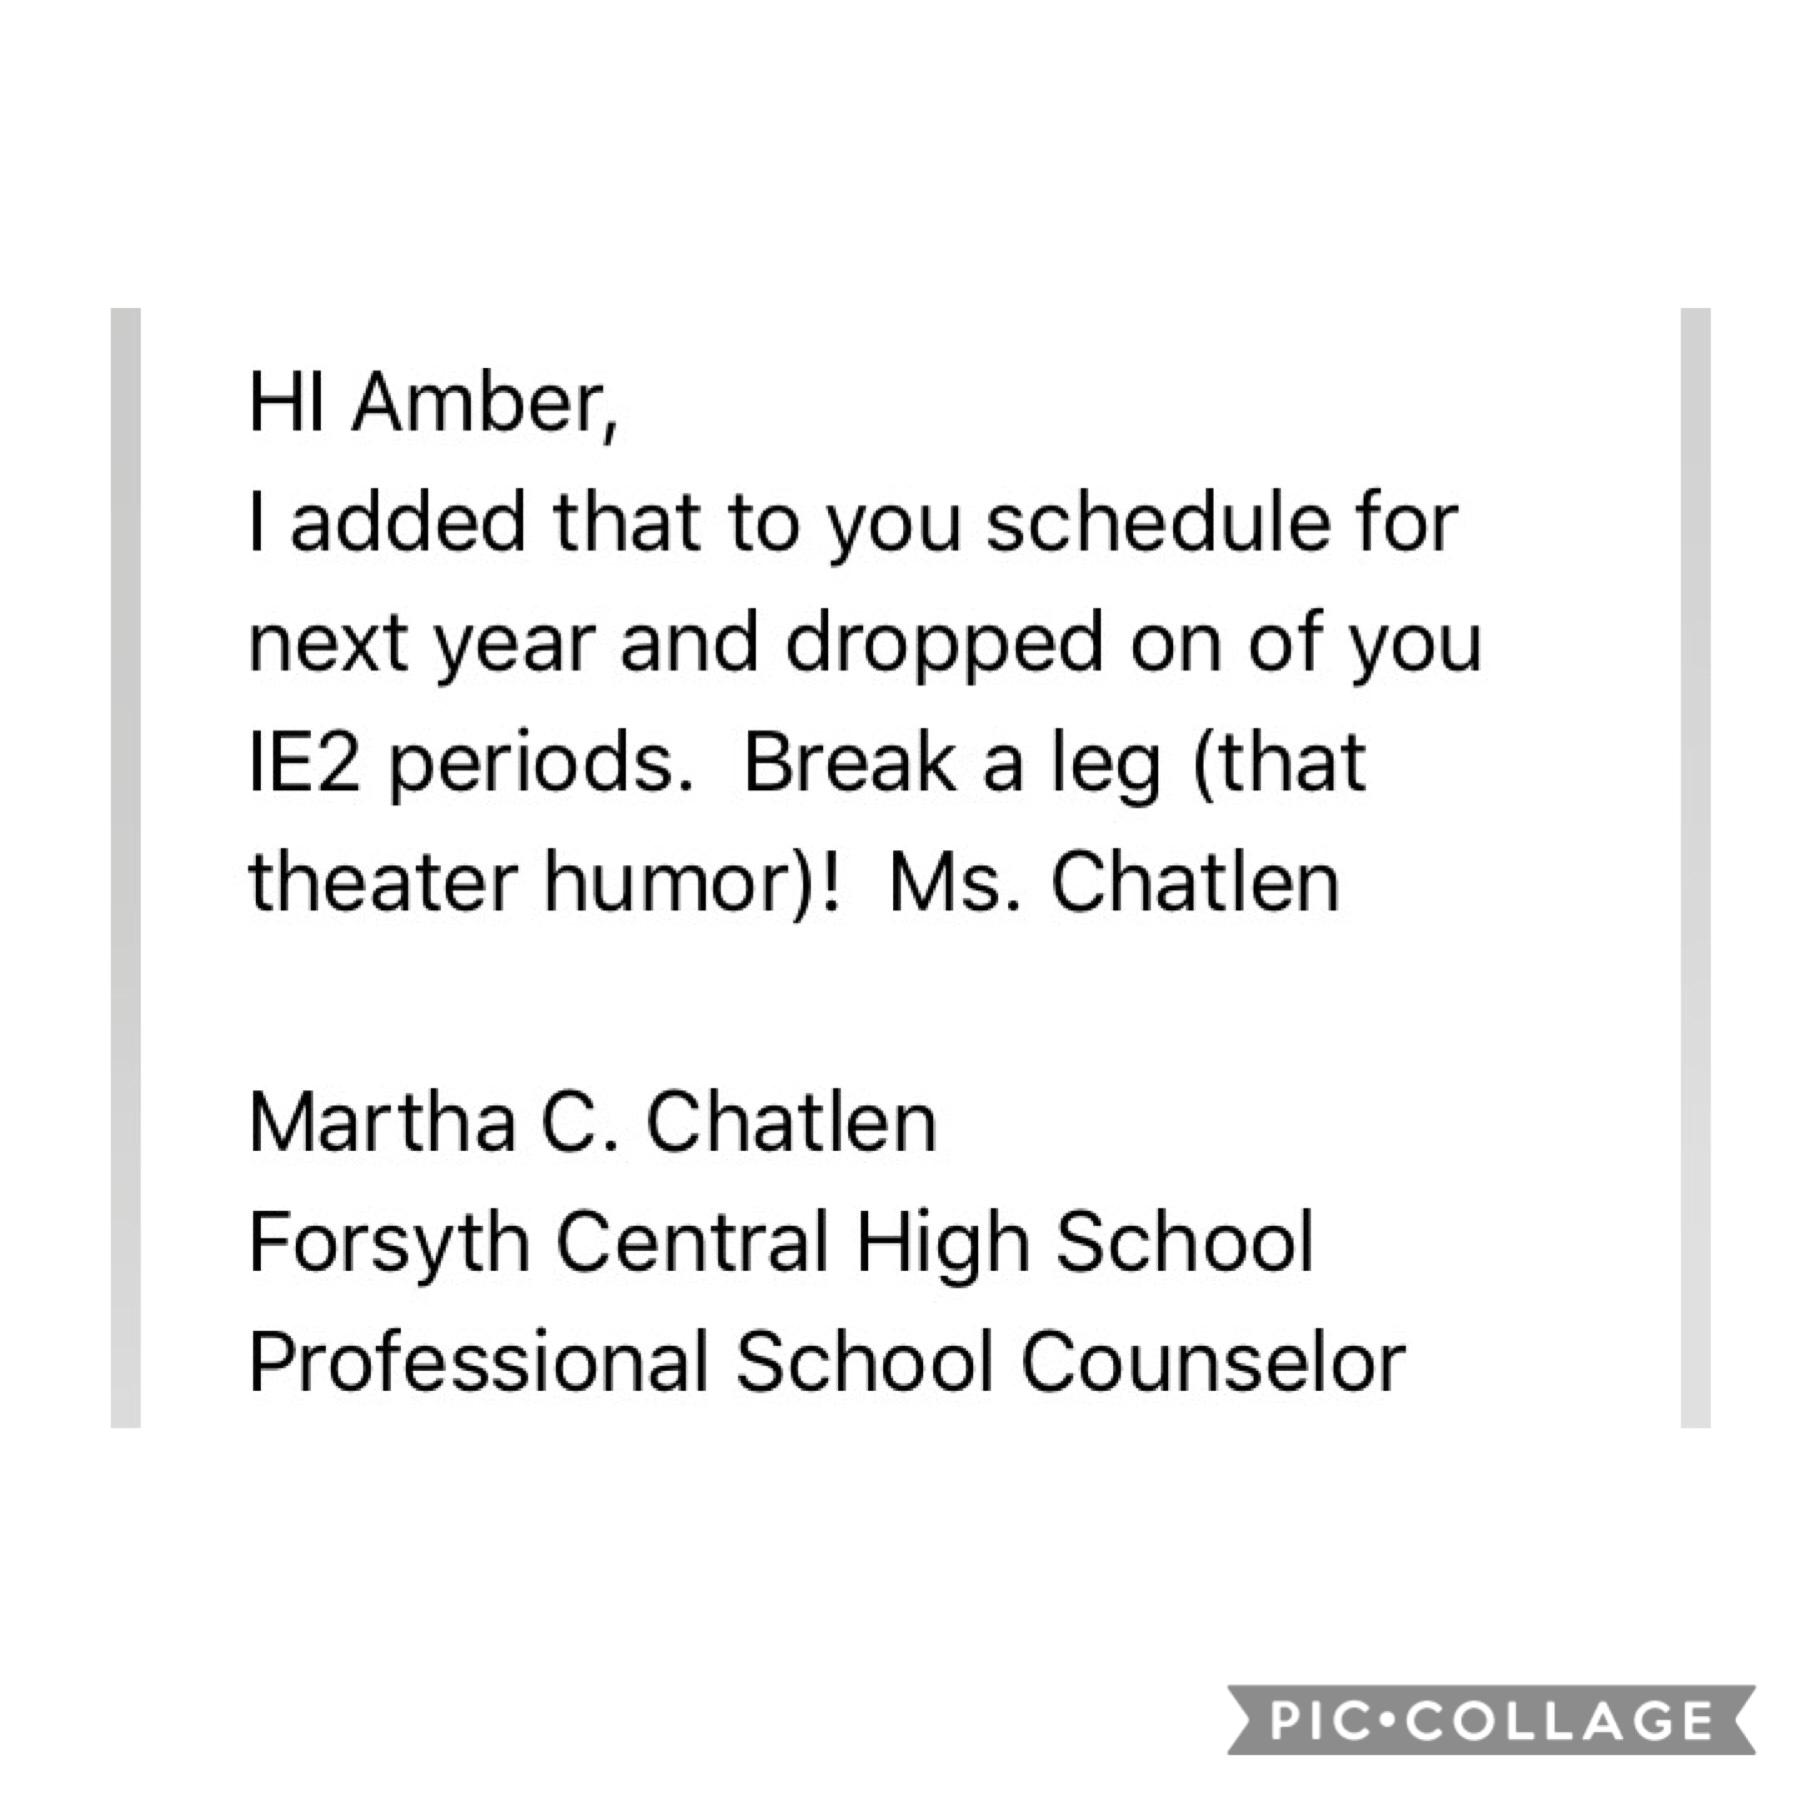 GUYS I JUST GOT THIS EMAIL RIGHT AFTER MARCHING LEADERSHIP TRAINING AND STARTED CRYING IM TAKING MUSICAL THEATRE NEXT YEARRRRRR IM SO HAPPY